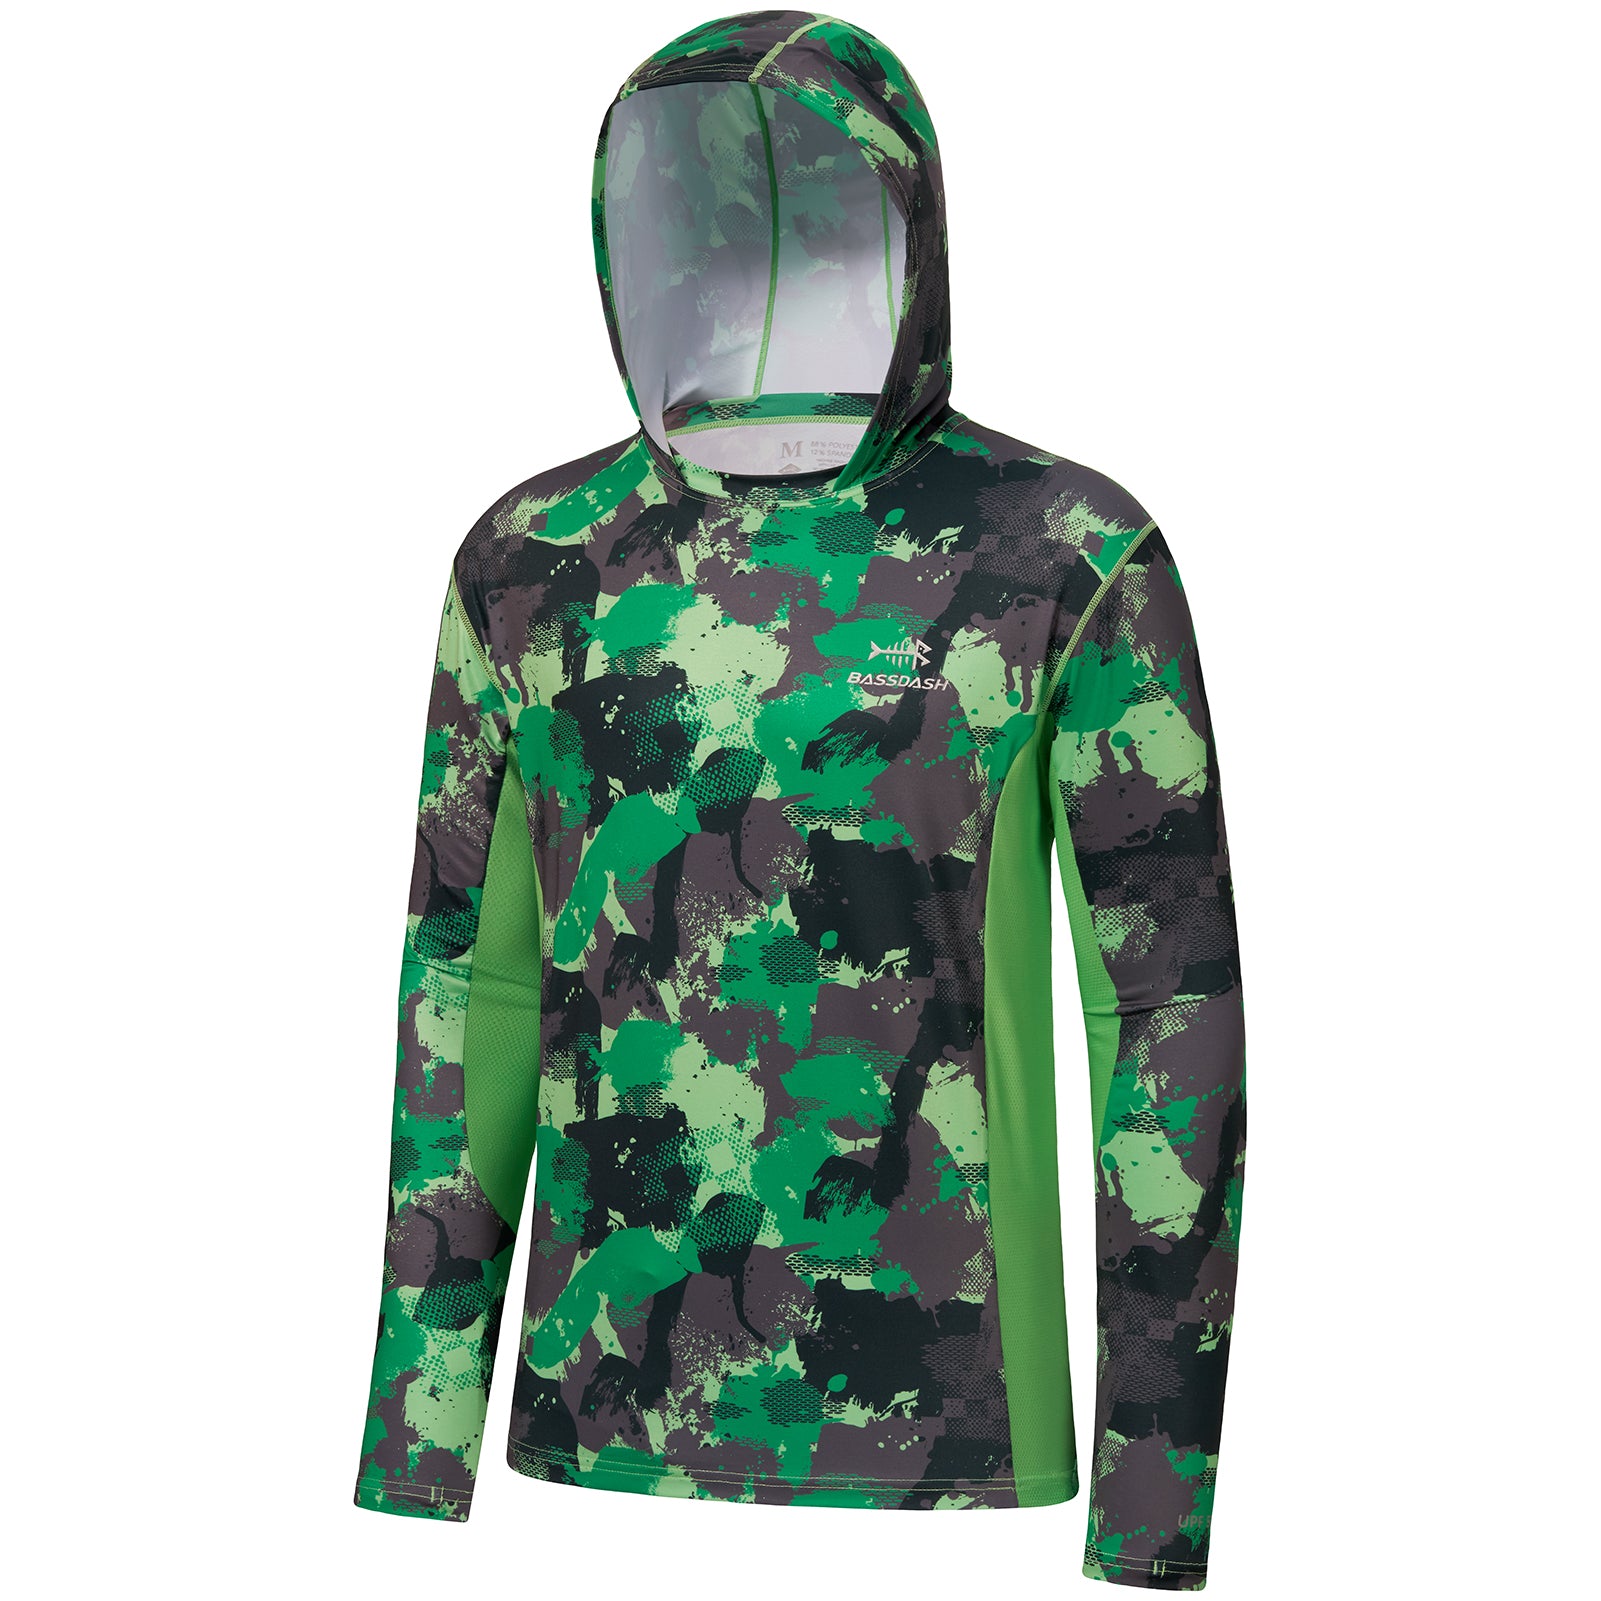 BASSDASH Mens UPF 50+ Fishing Hiking Camo Hoodie Shirt with Face Mask  Lightweight Neck Gaiter Long Sleeve Green Camo With Neck Gaiter X-Large